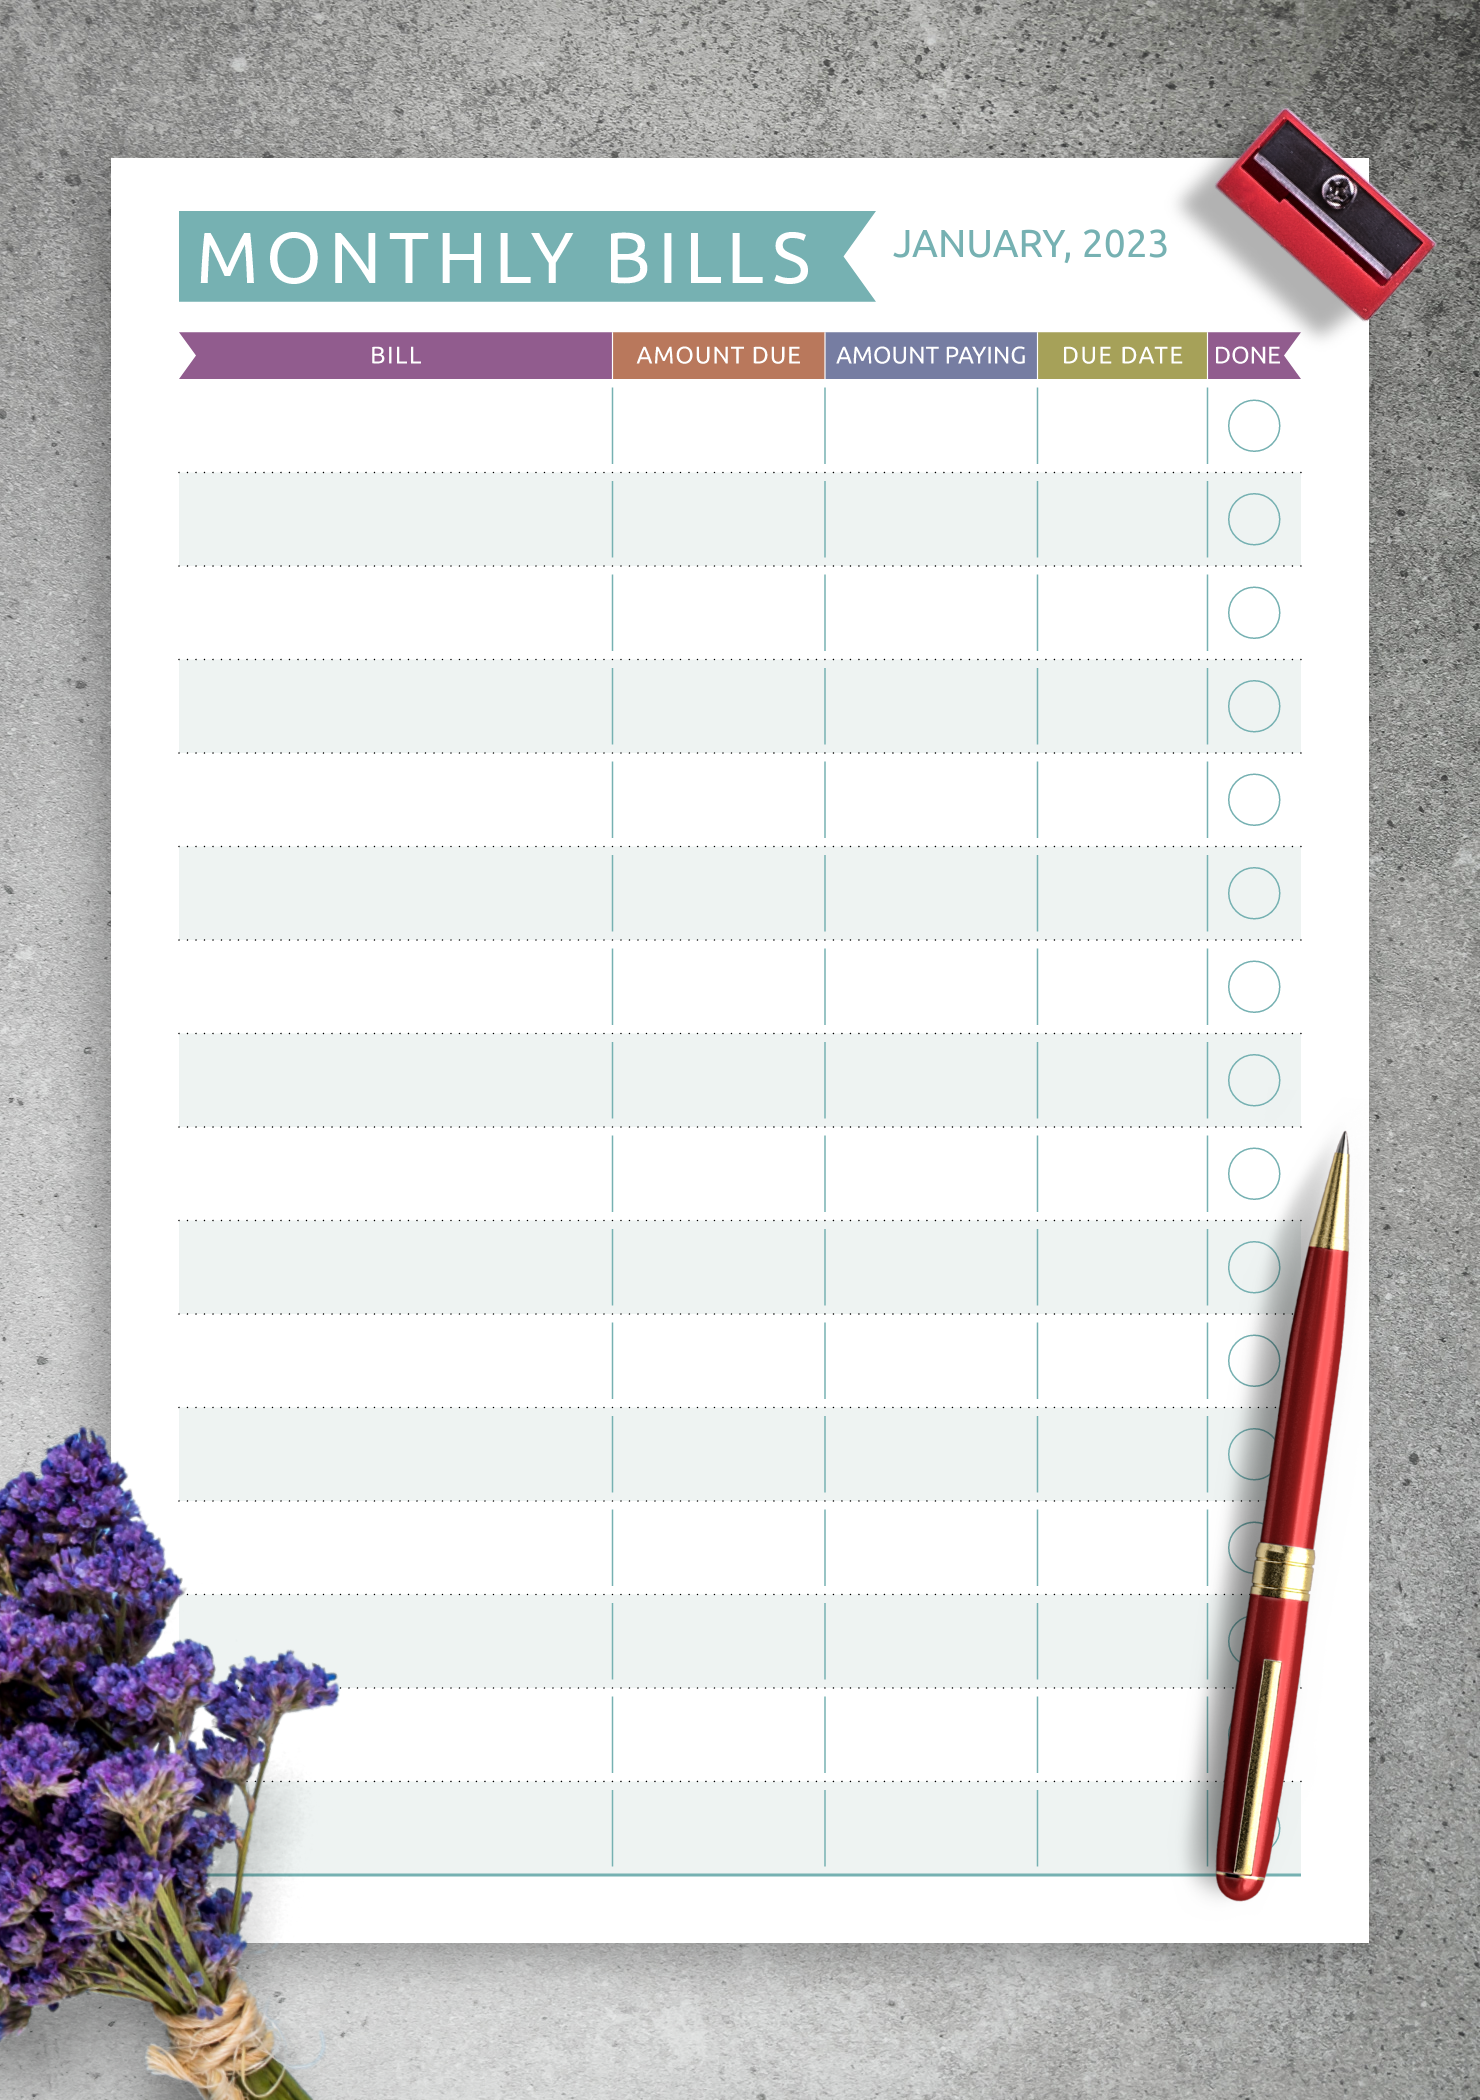 Printable Monthly Bills Template